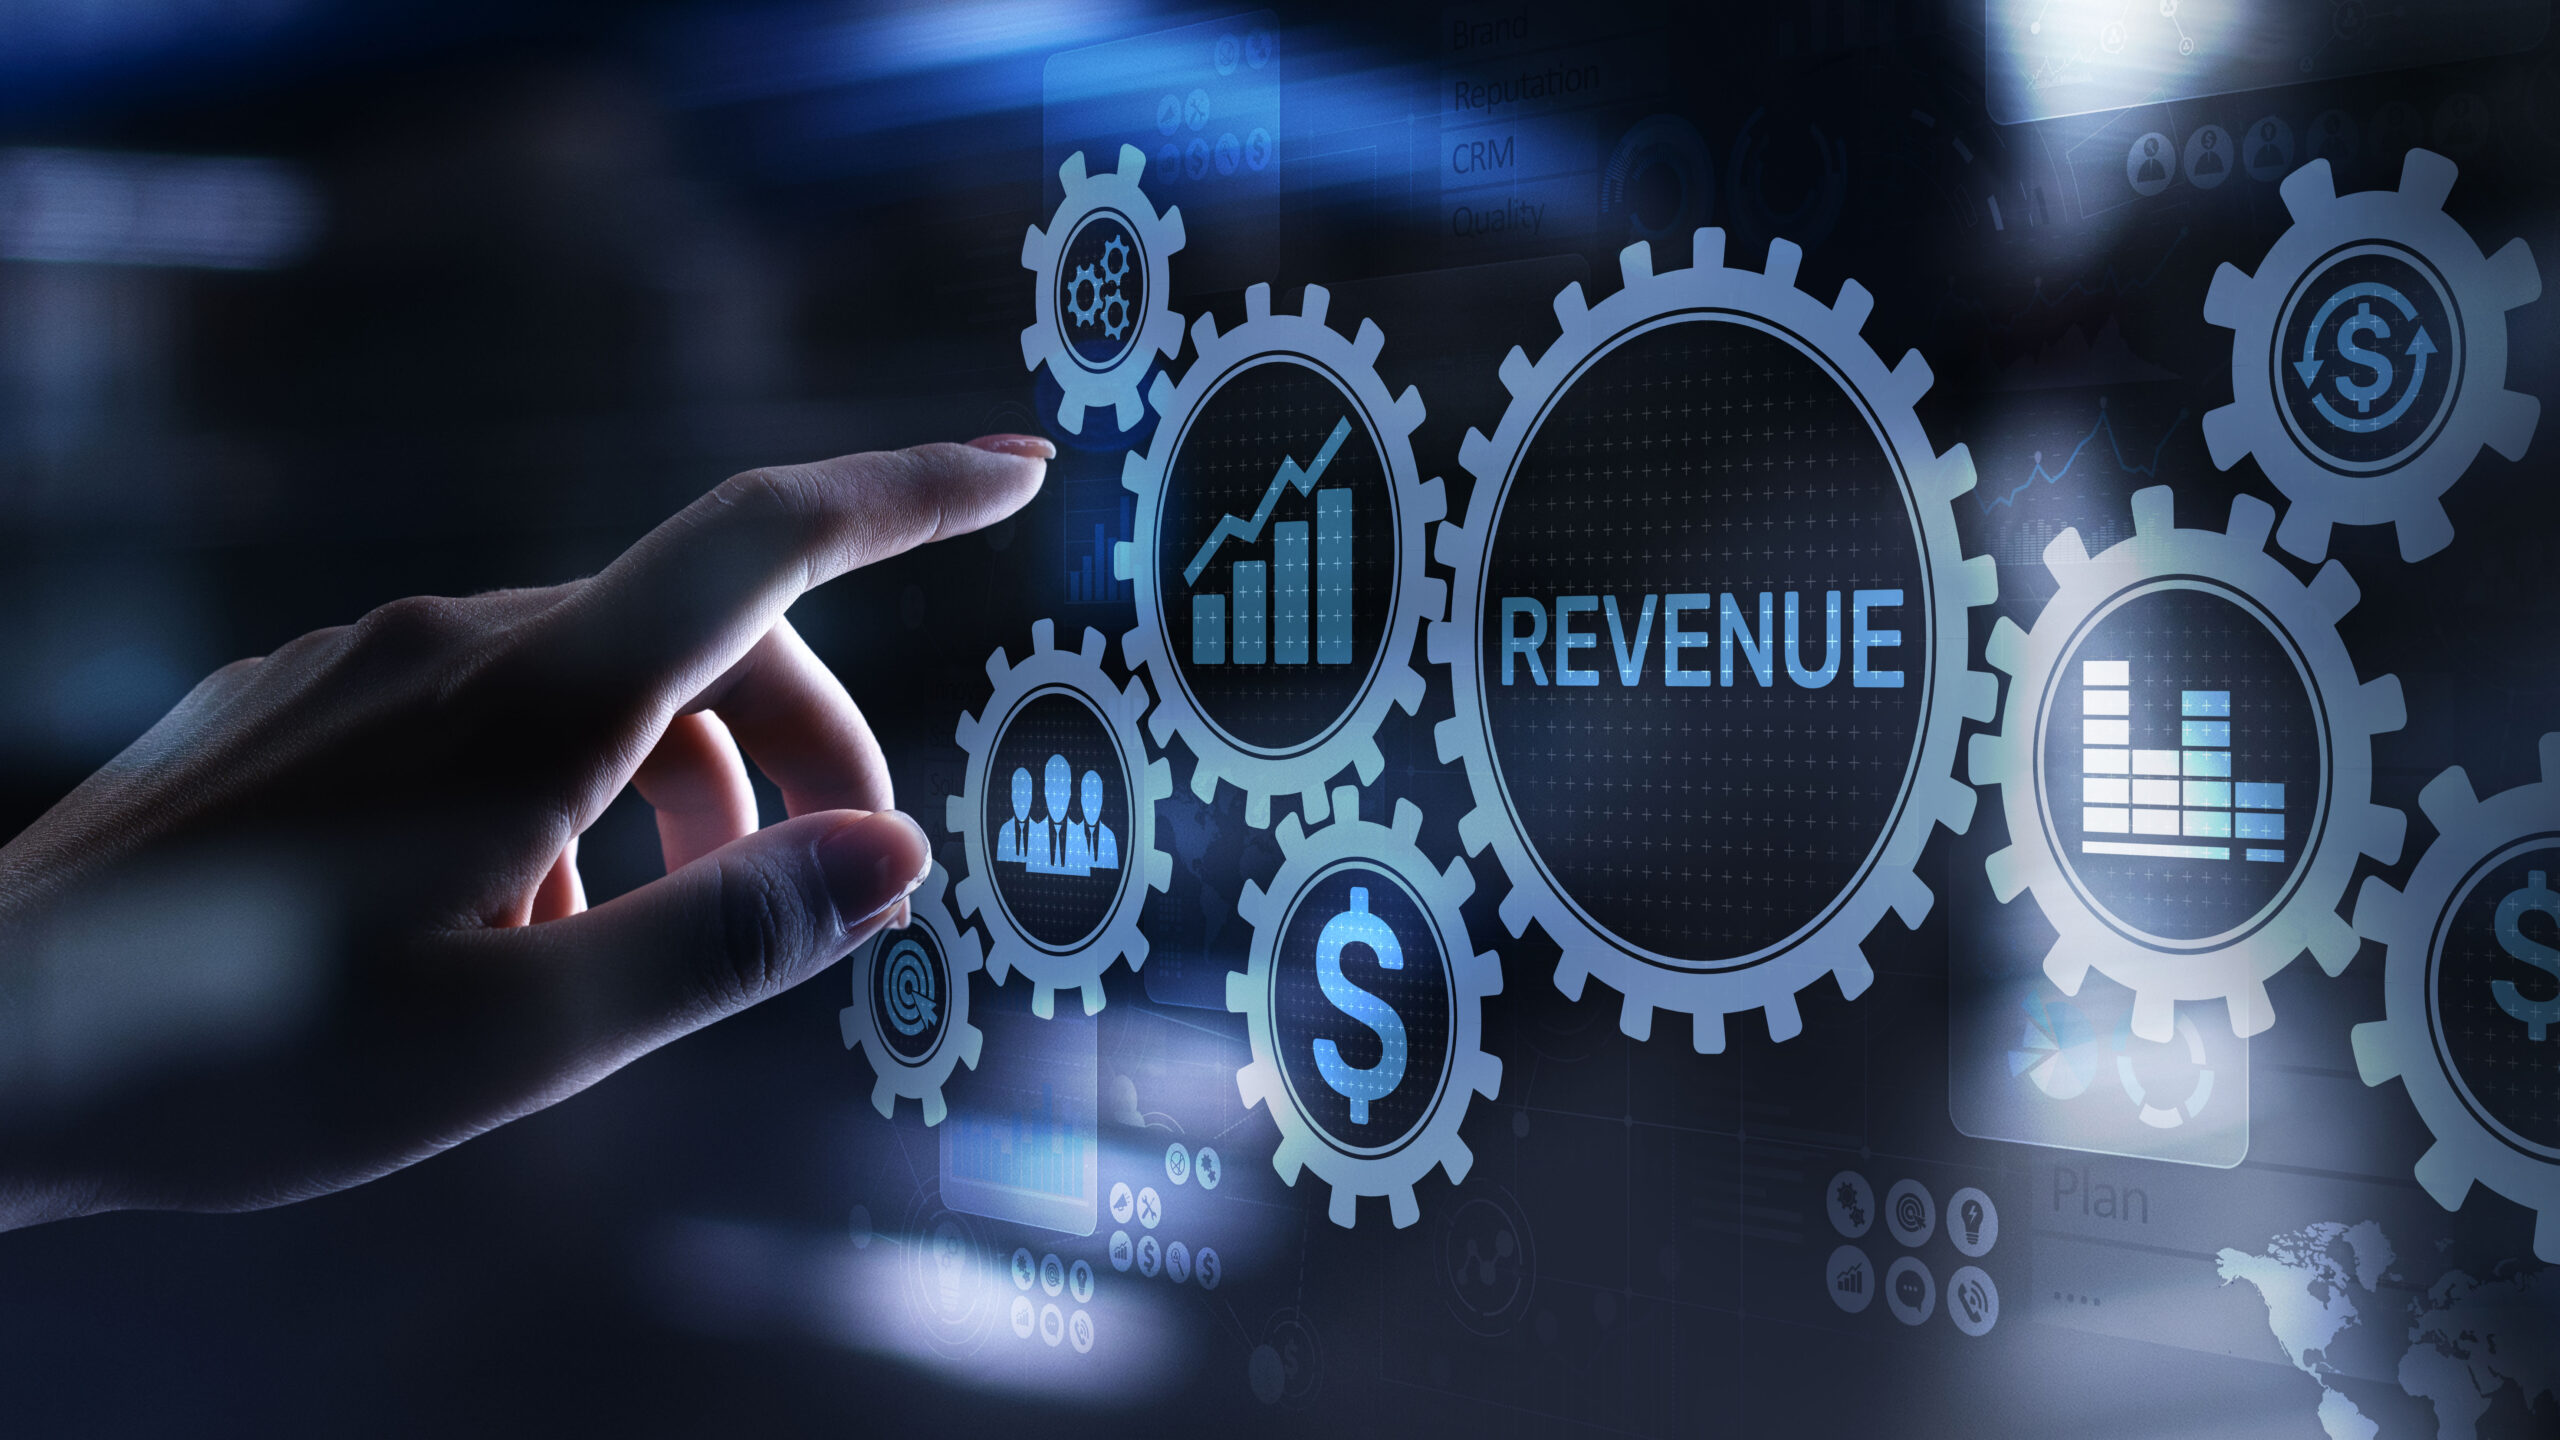 Data quality can improve sales and revenue